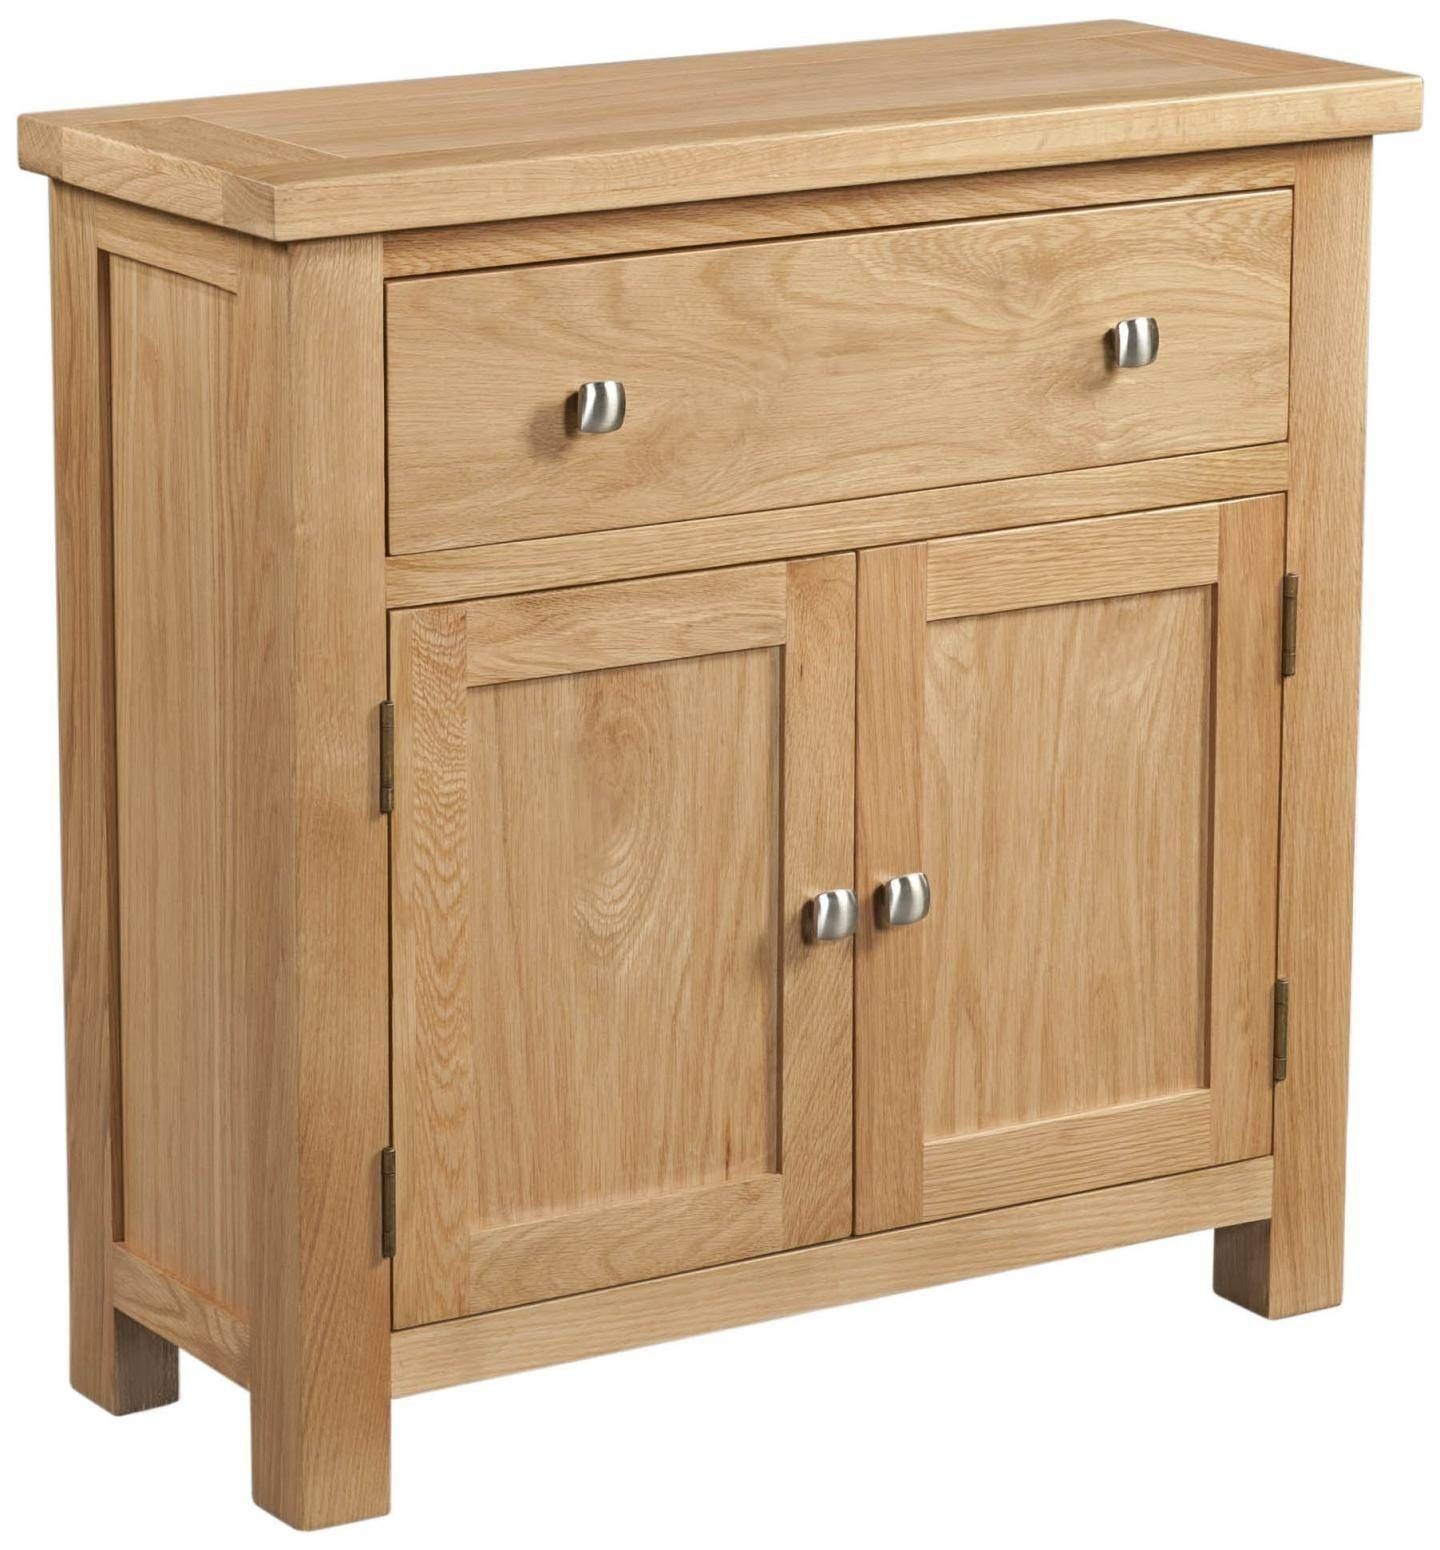 Lovely Pine & Oak Sideboards | Willoby's Furniture Swindon, Wiltshire With Small Sideboards (Photo 7 of 20)